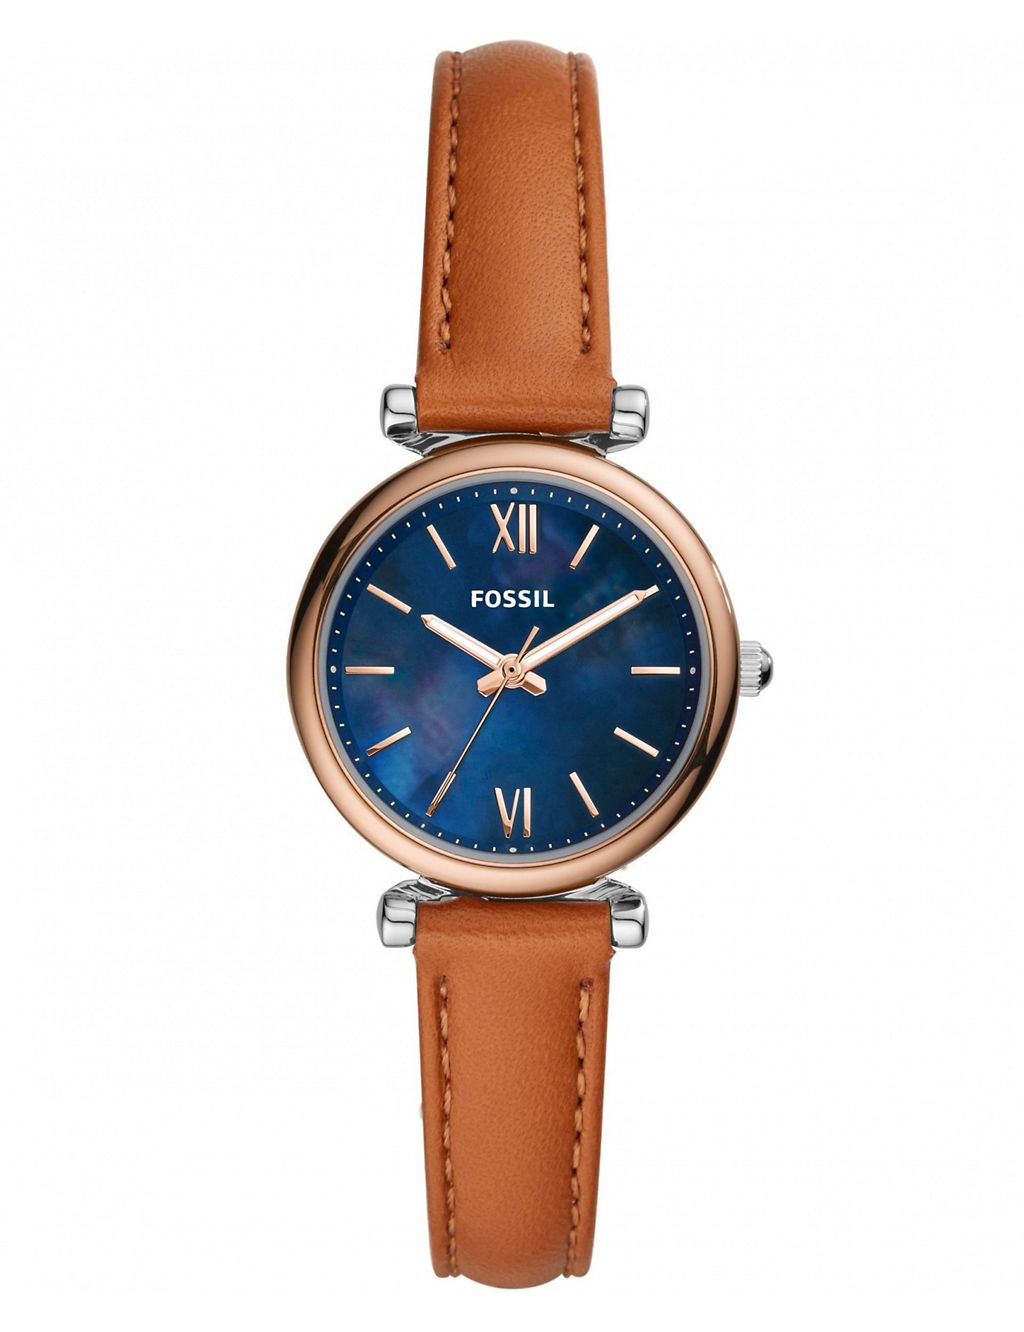 Fossil Carlie Brown Leather Watch 3 of 5